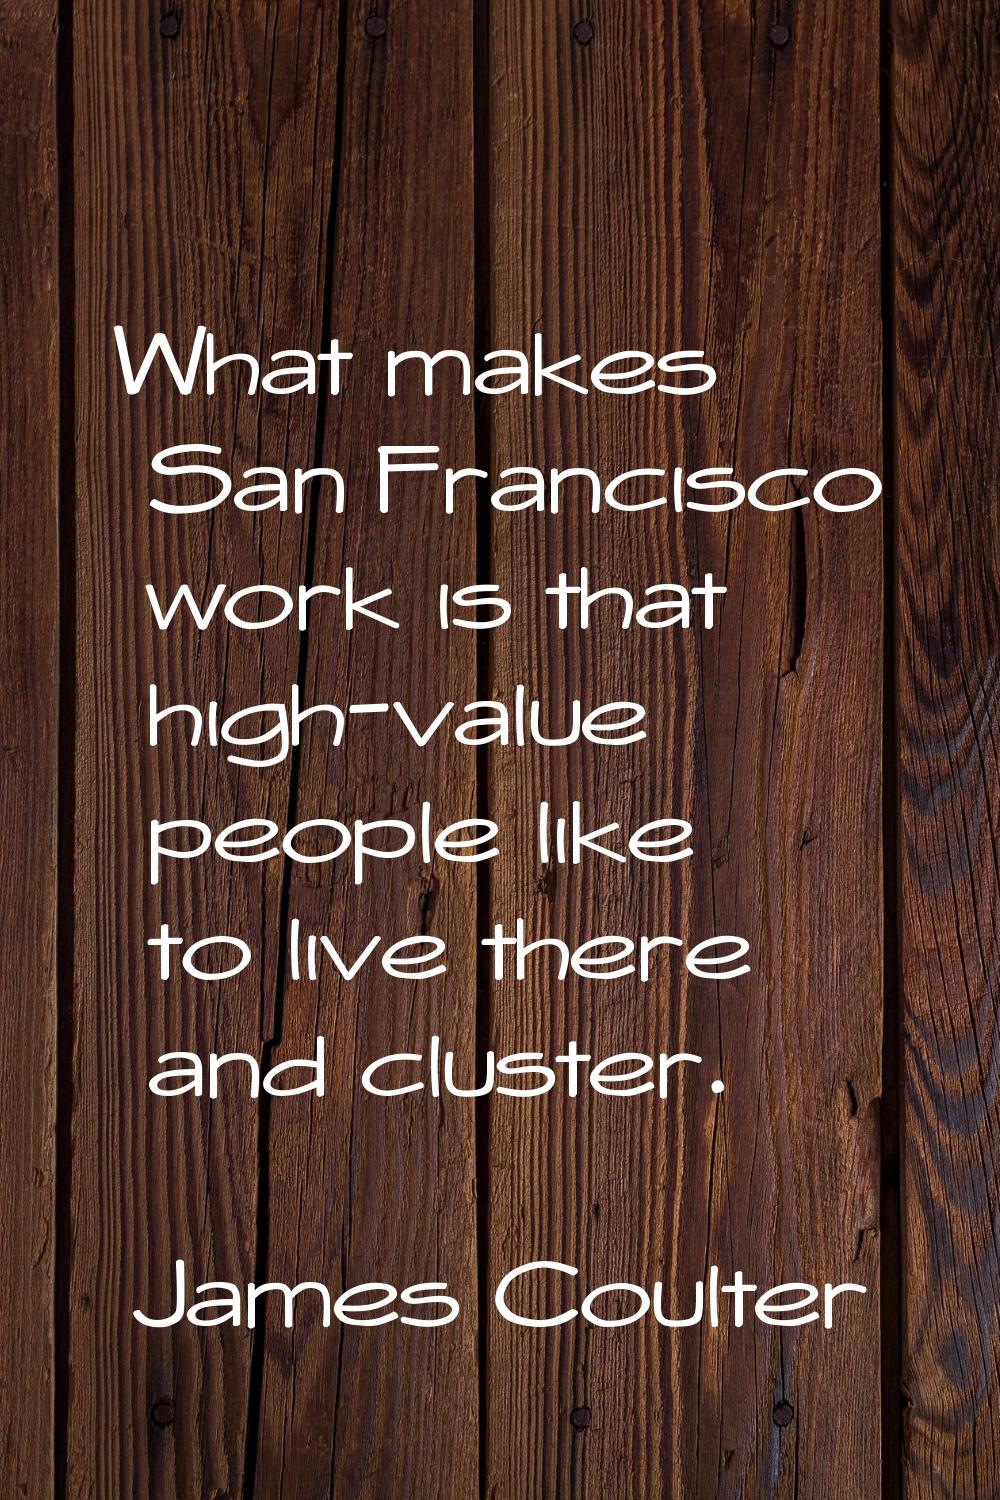 What makes San Francisco work is that high-value people like to live there and cluster.